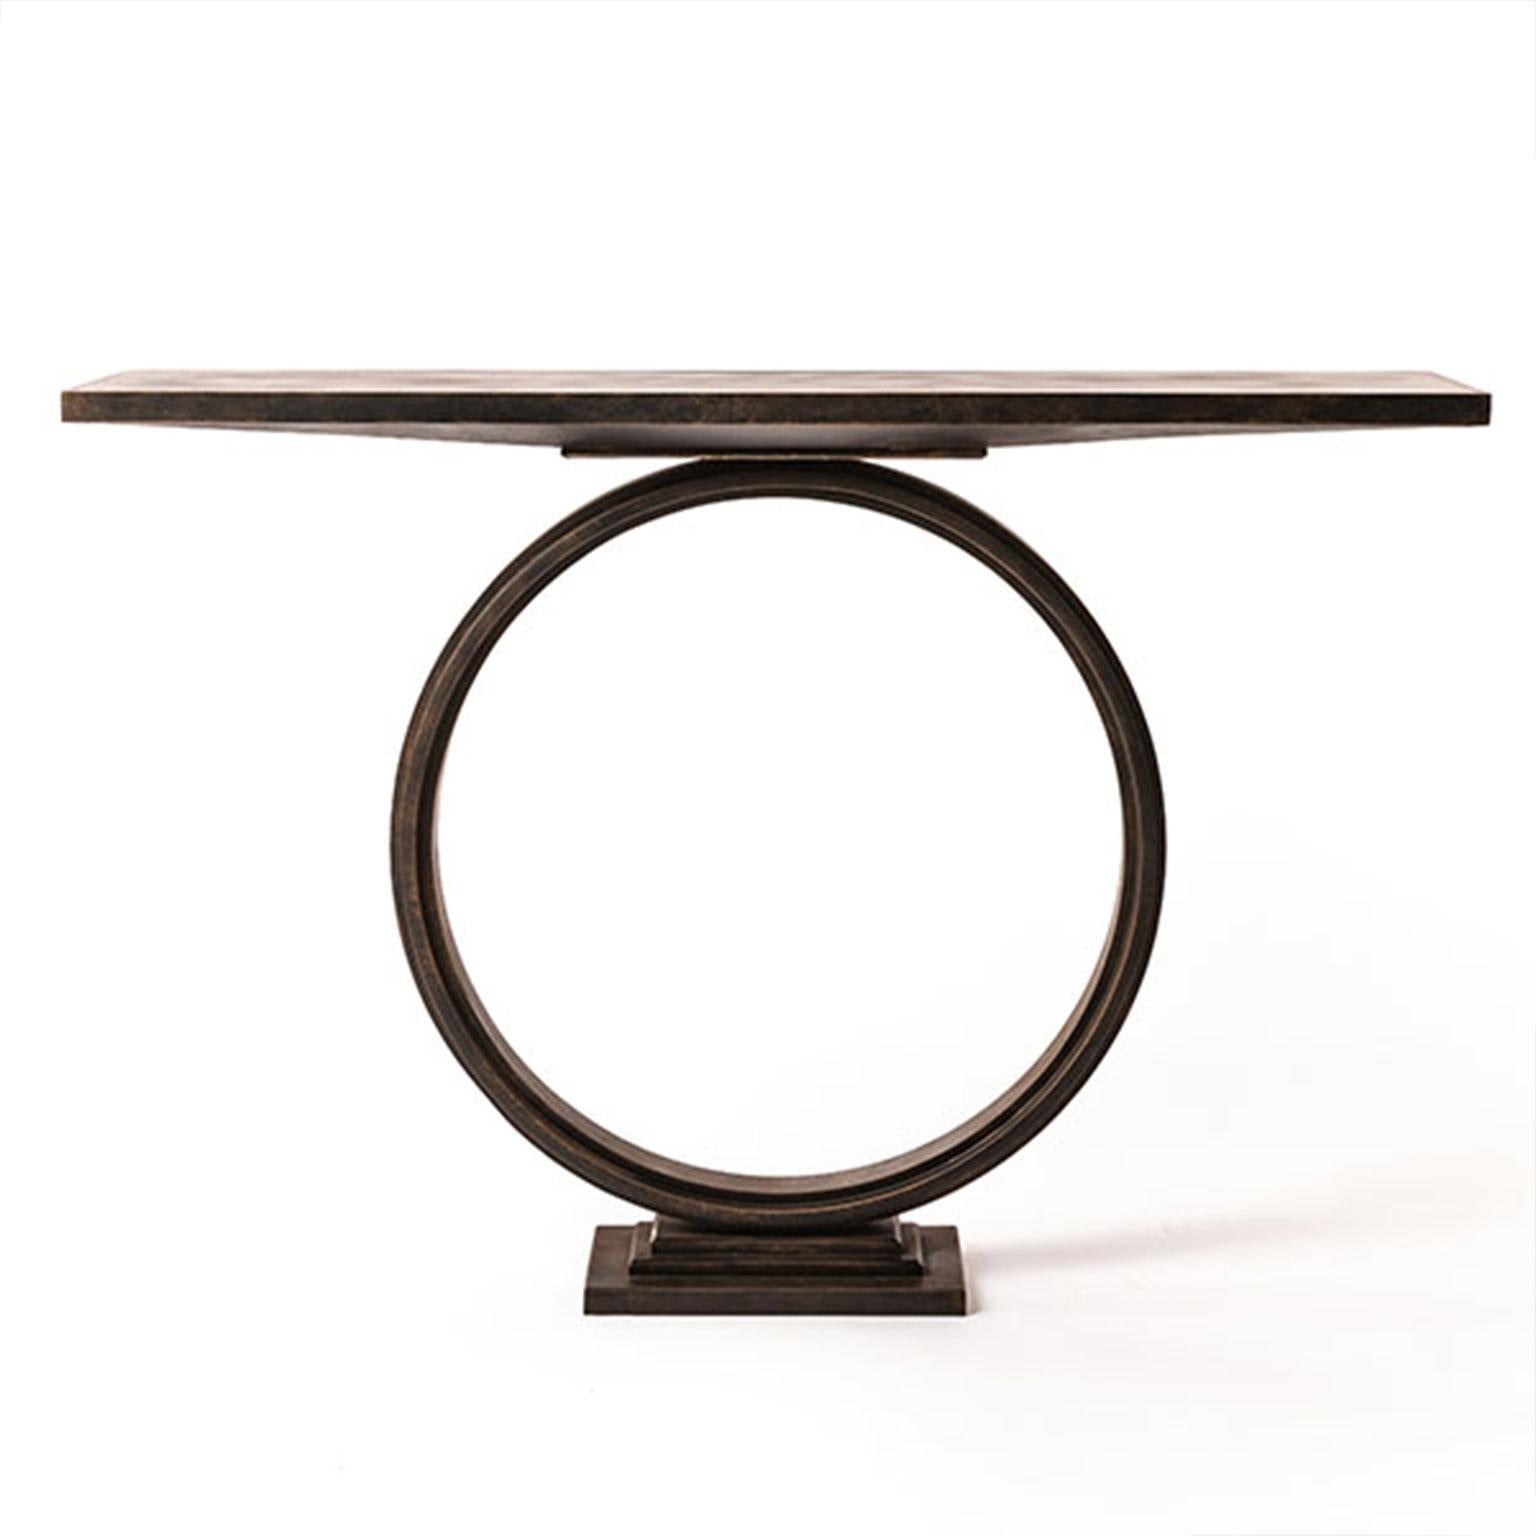 Elegant and timeless in design, the Ra console table is made up of several multi-stranded rings forged together to create a stunning, round base on which the top appears to float. Shown here in bronze finish and metal top.

Designed and